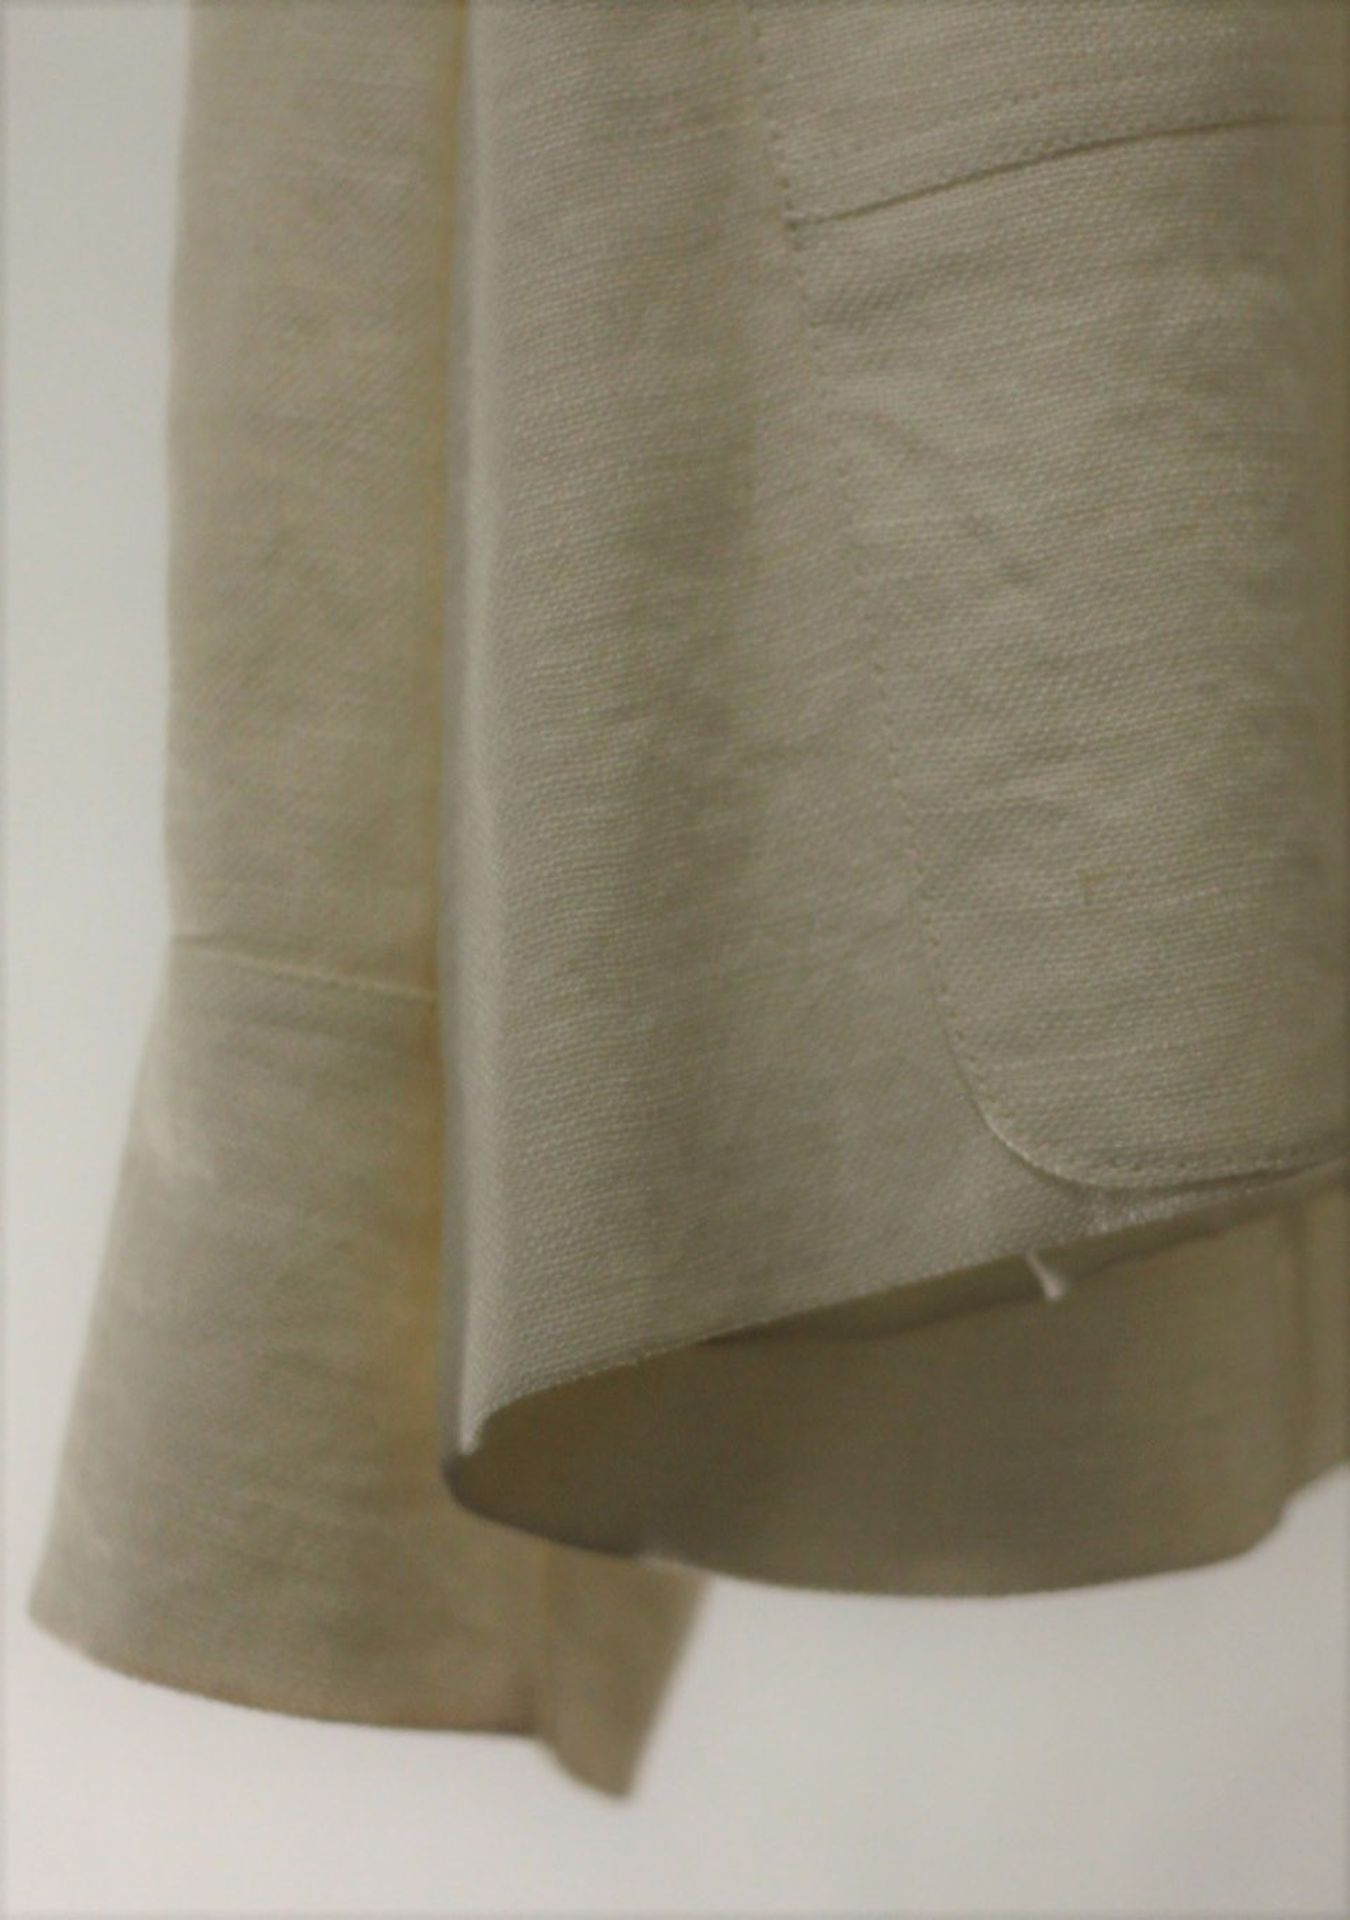 1 x Constantin Paris Cream Jacket - Size: 24 - Material: 100% Linen - From a High End Clothing - Image 5 of 6